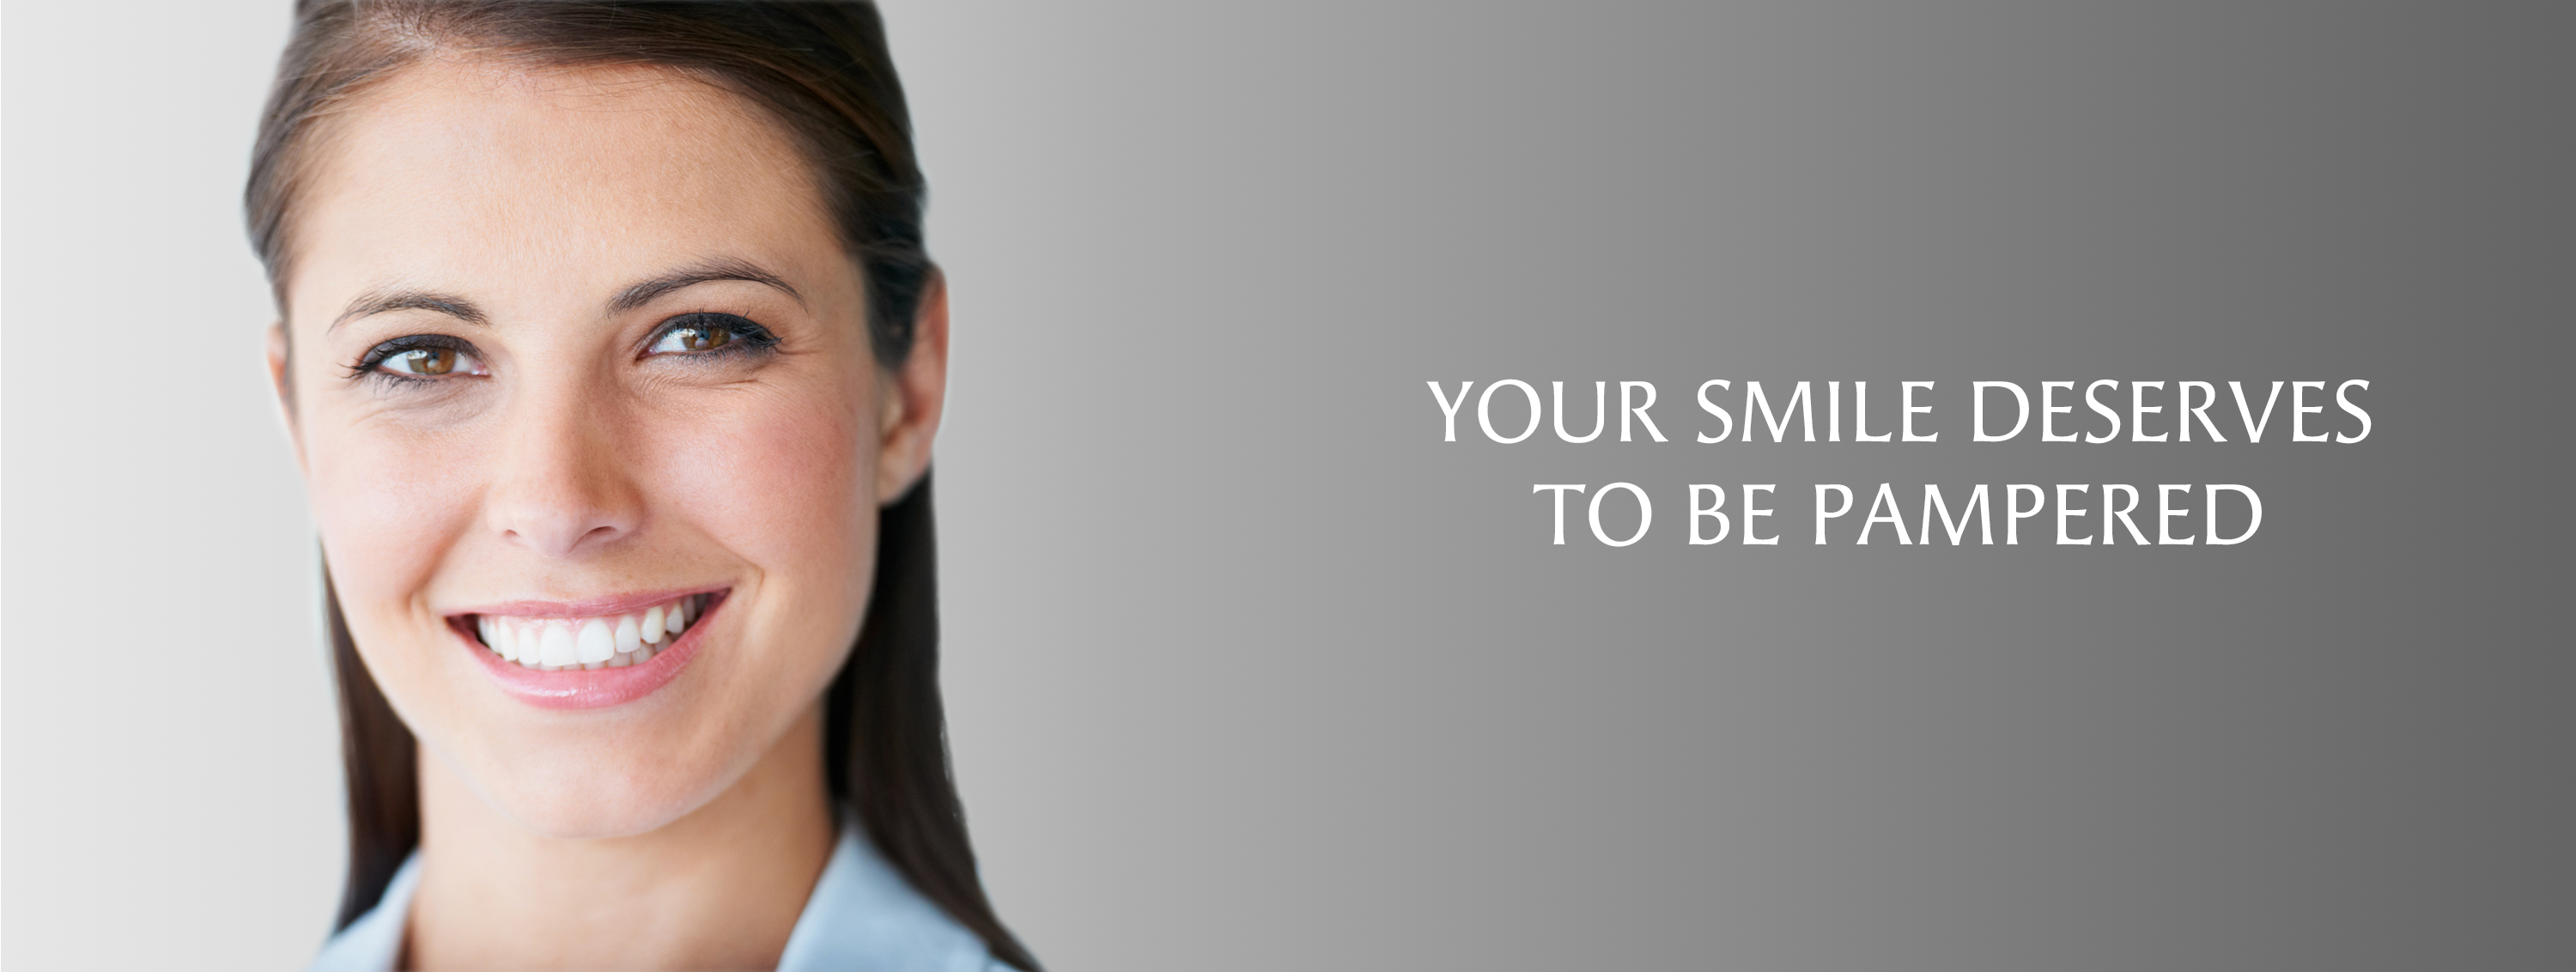 woman smiling - banner image